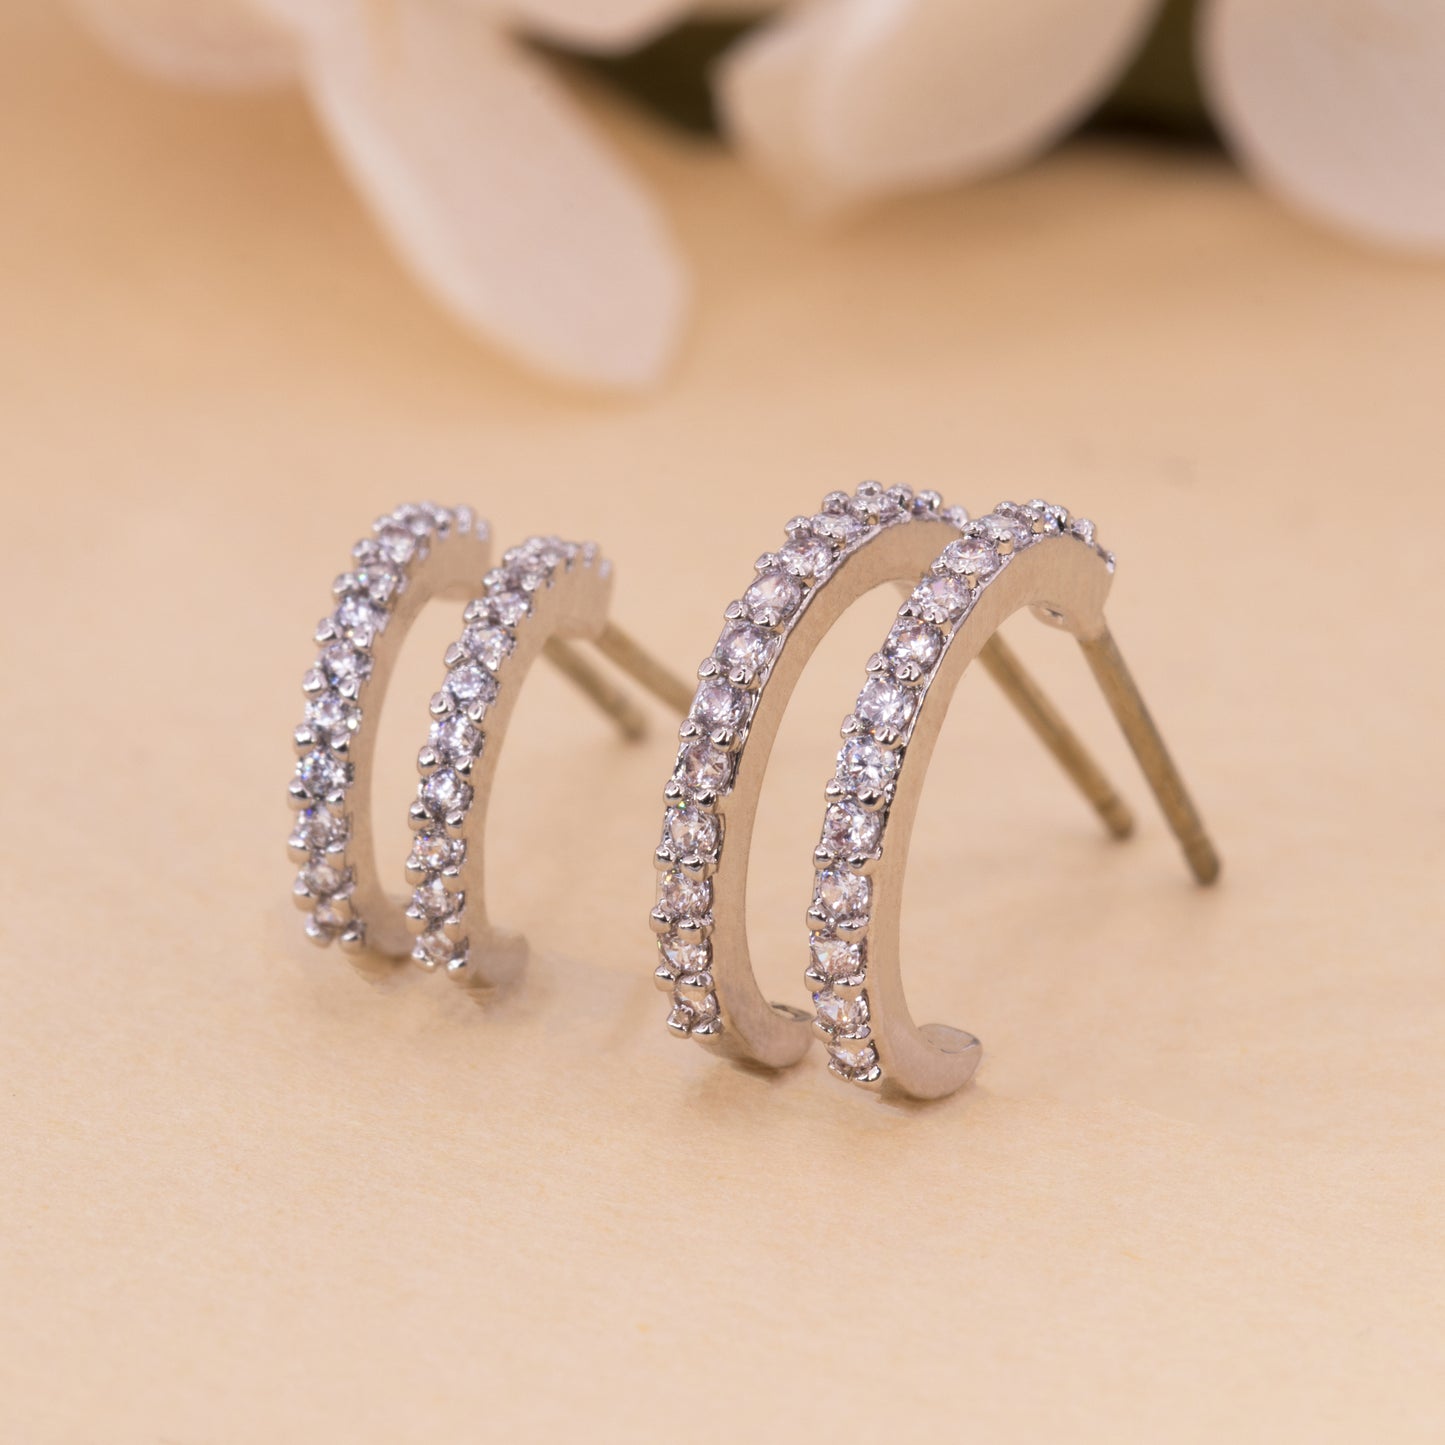 Tiny Clear Hoops Earrings Set of 2